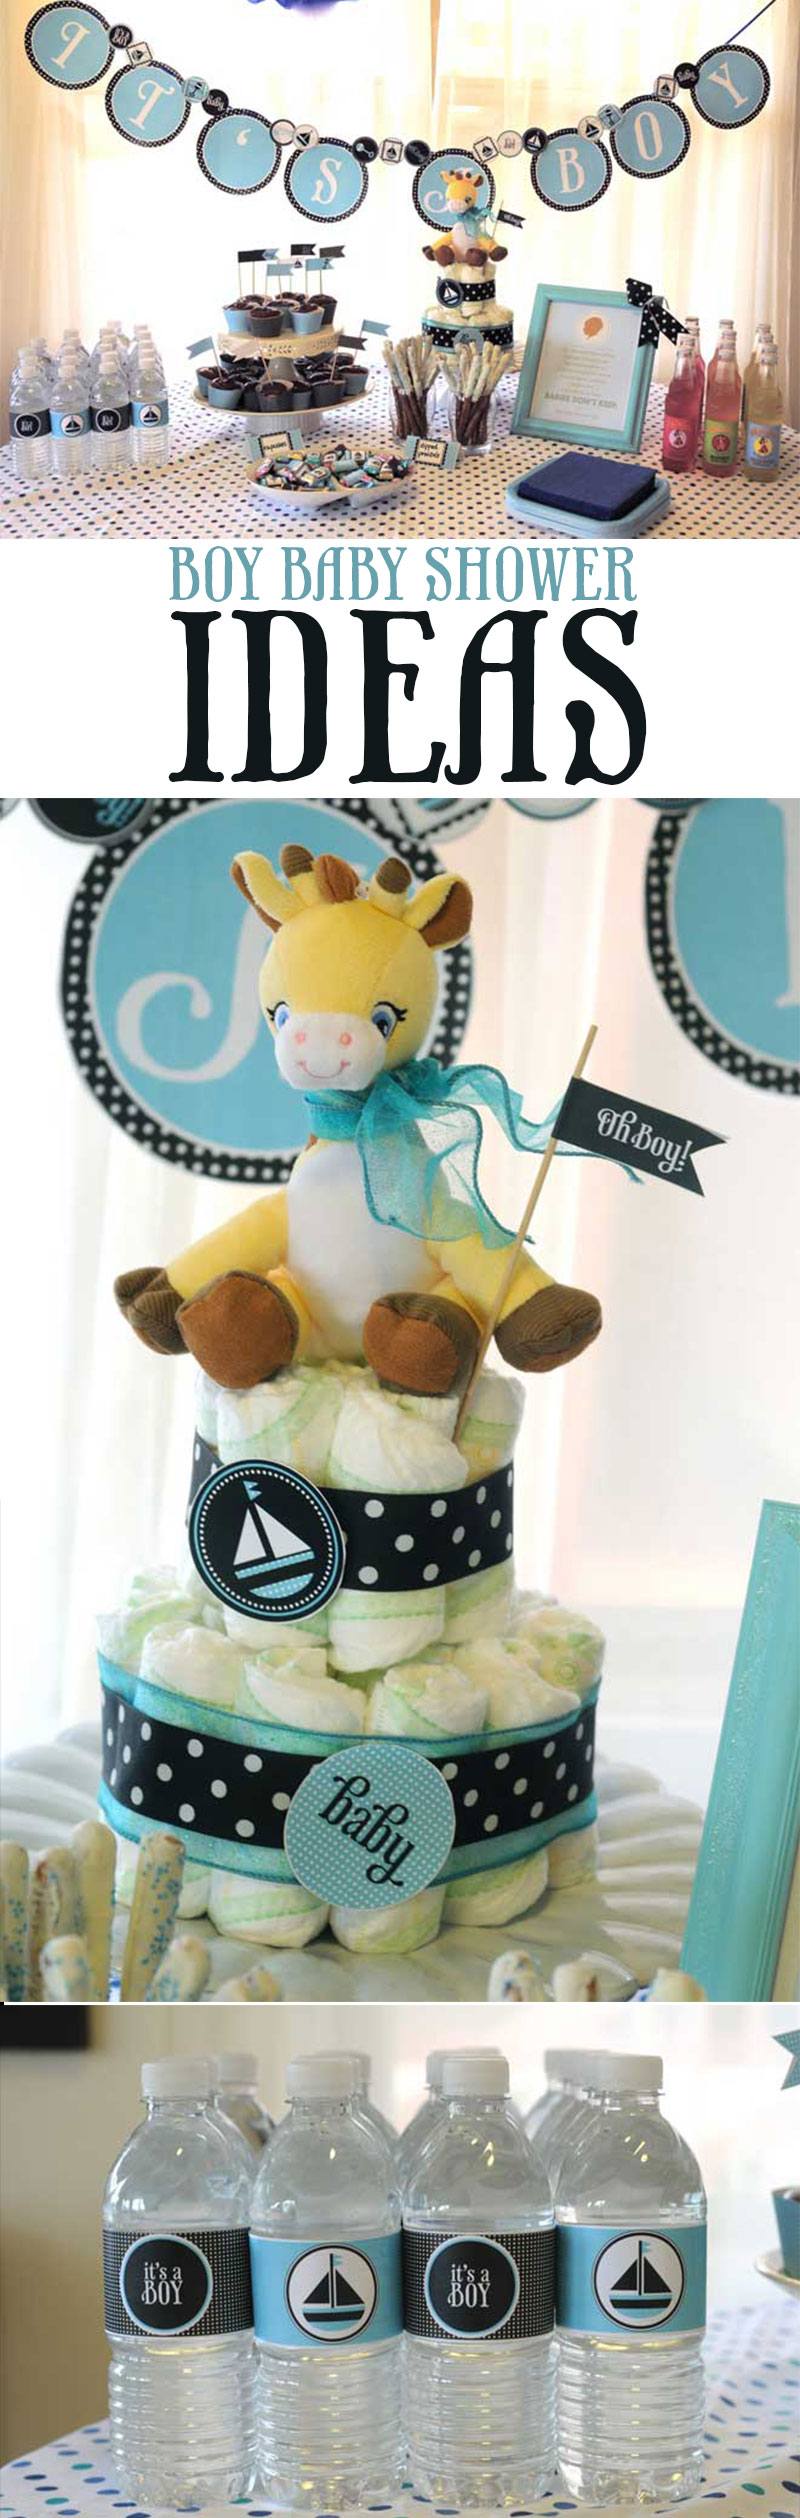 Boy Baby Shower Ideas on Love The Day